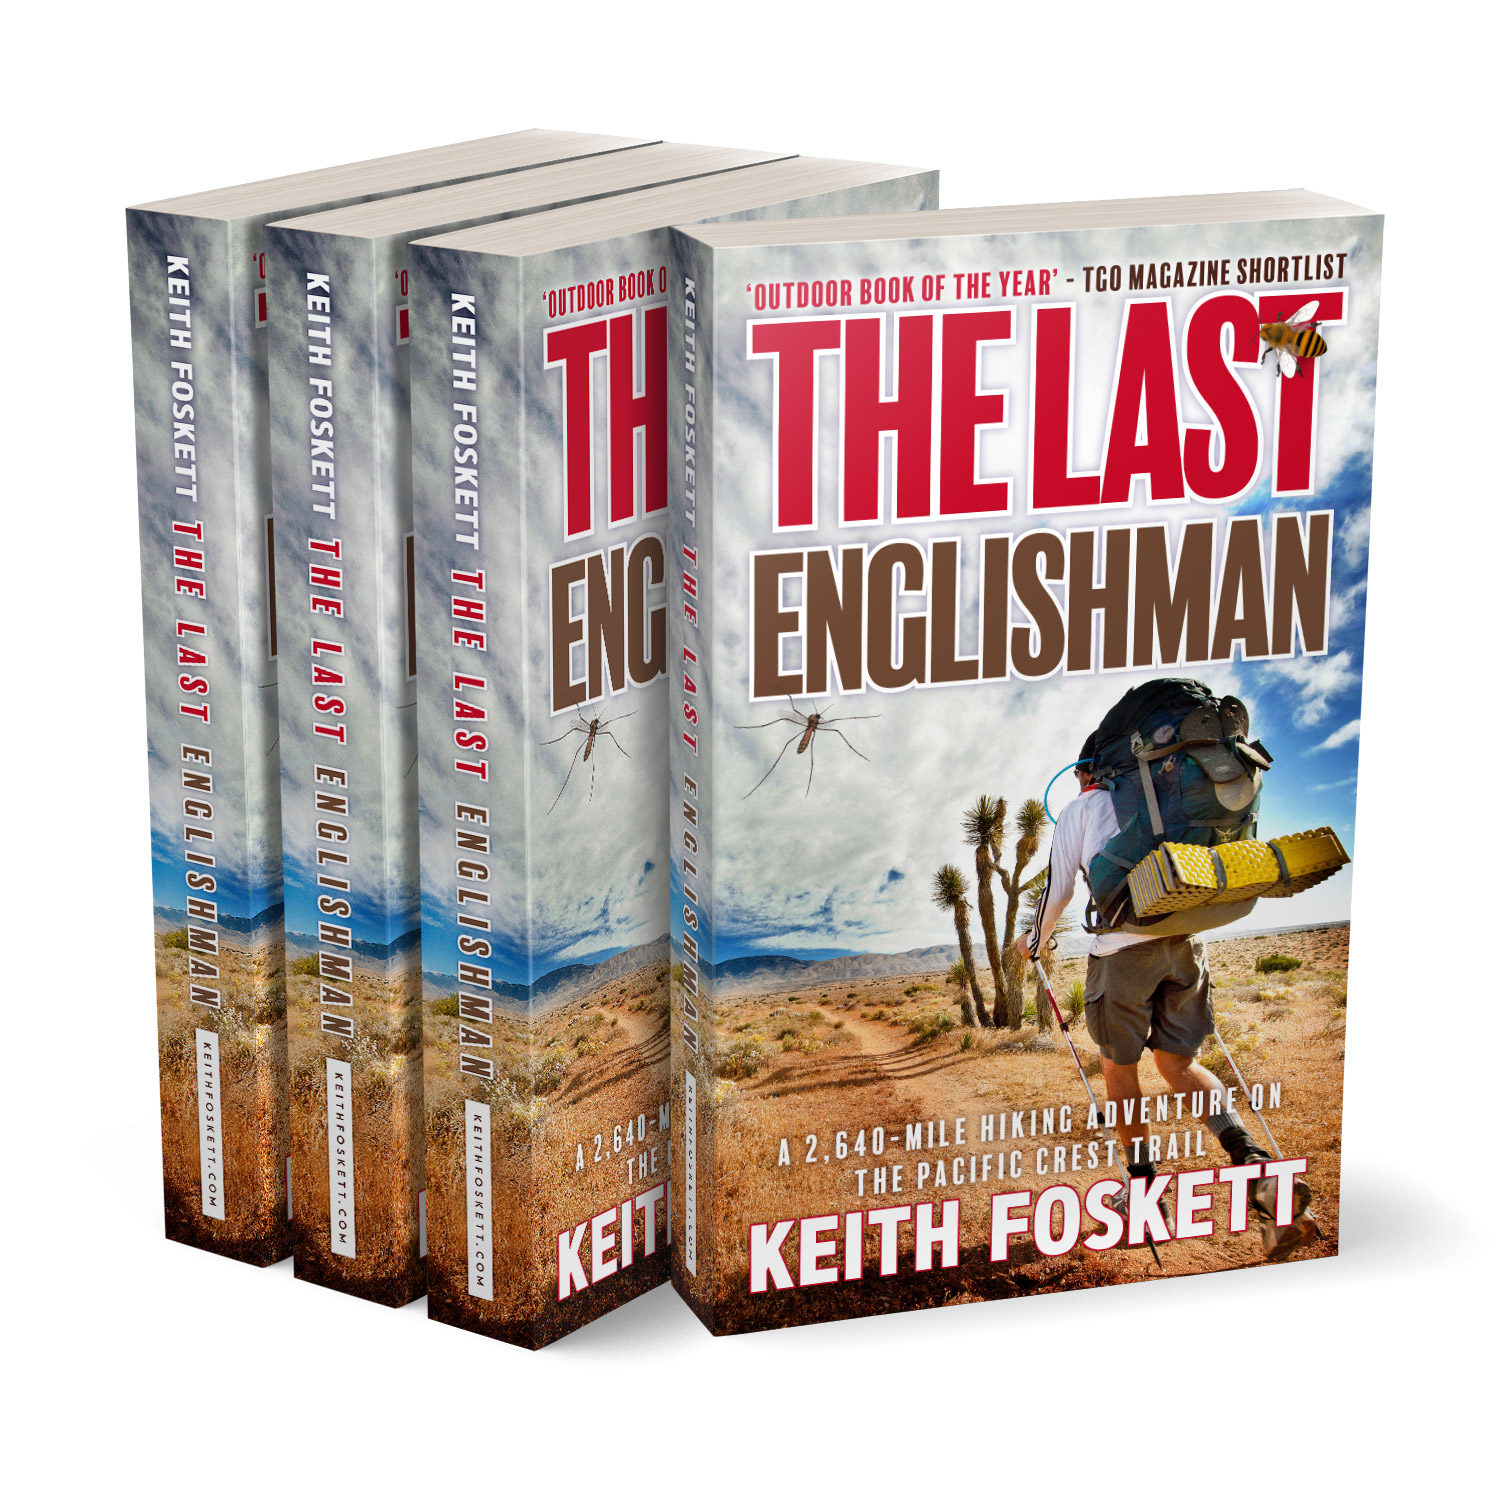 'The Last Englishman' is an excellent humorous walking memoir, about one man's trek along the Pacific Coast Trail. The author is Keith Foskett. The book cover was designed by Mark Thomas, of coverness.com. To find out more about my book design services, please visit www.coverness.com.